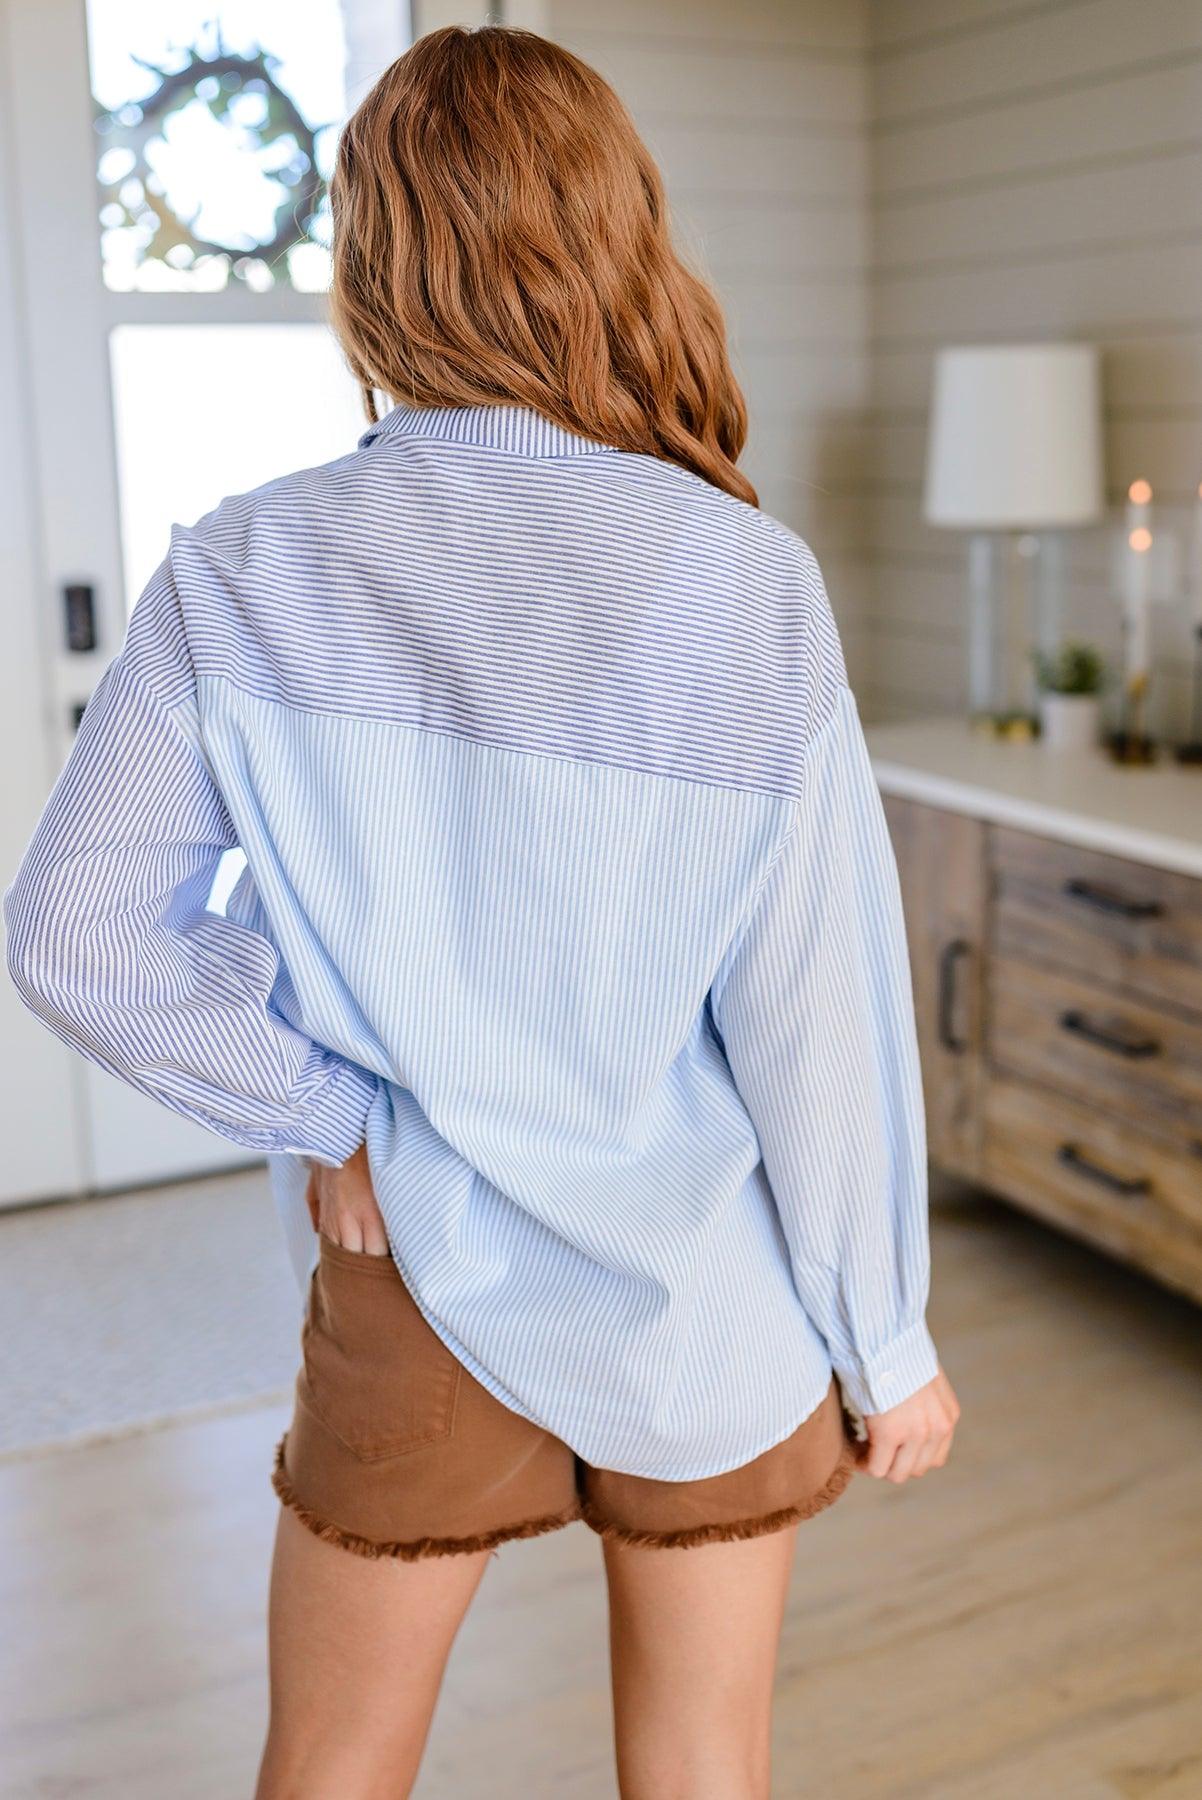 Yours or Mine Striped Button Down - The Fiery Jasmine